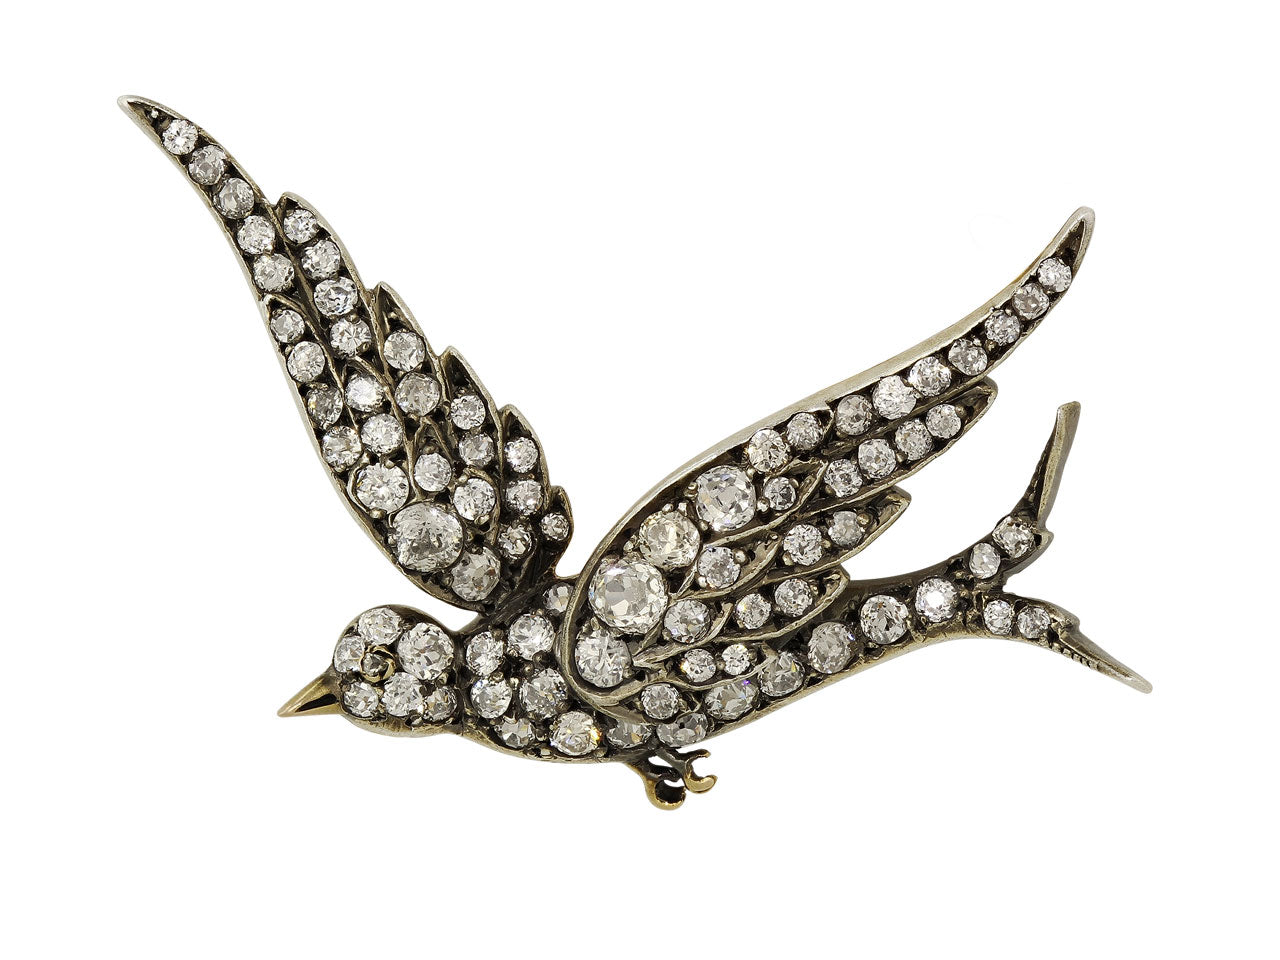 Antique Victorian Diamond Bird Brooch in Silver and Gold